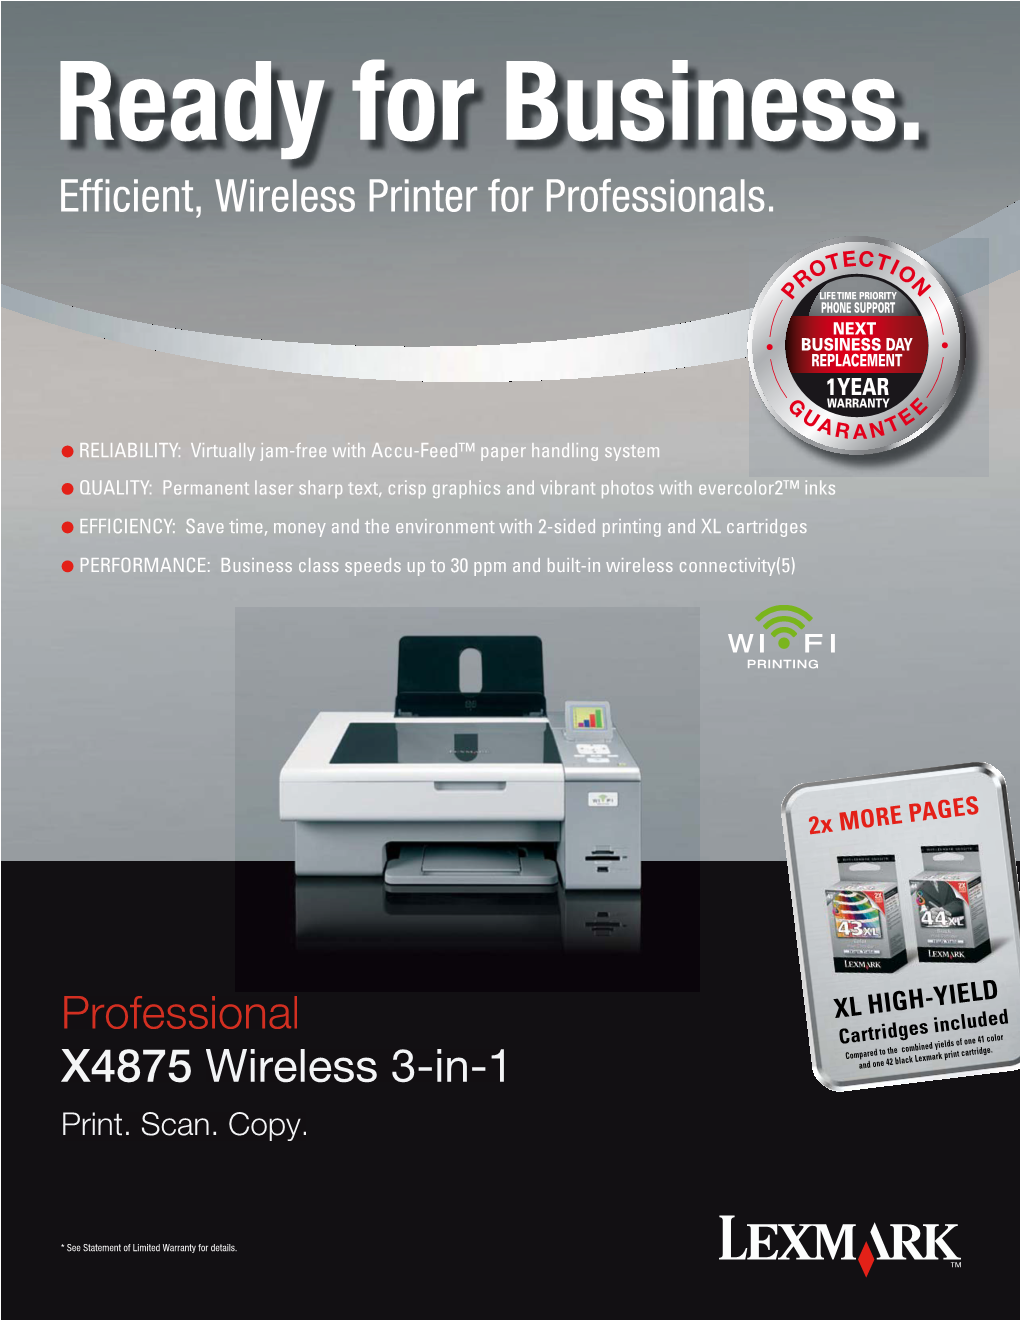 Lexmark X4875 Wireless All-In-One with Fax